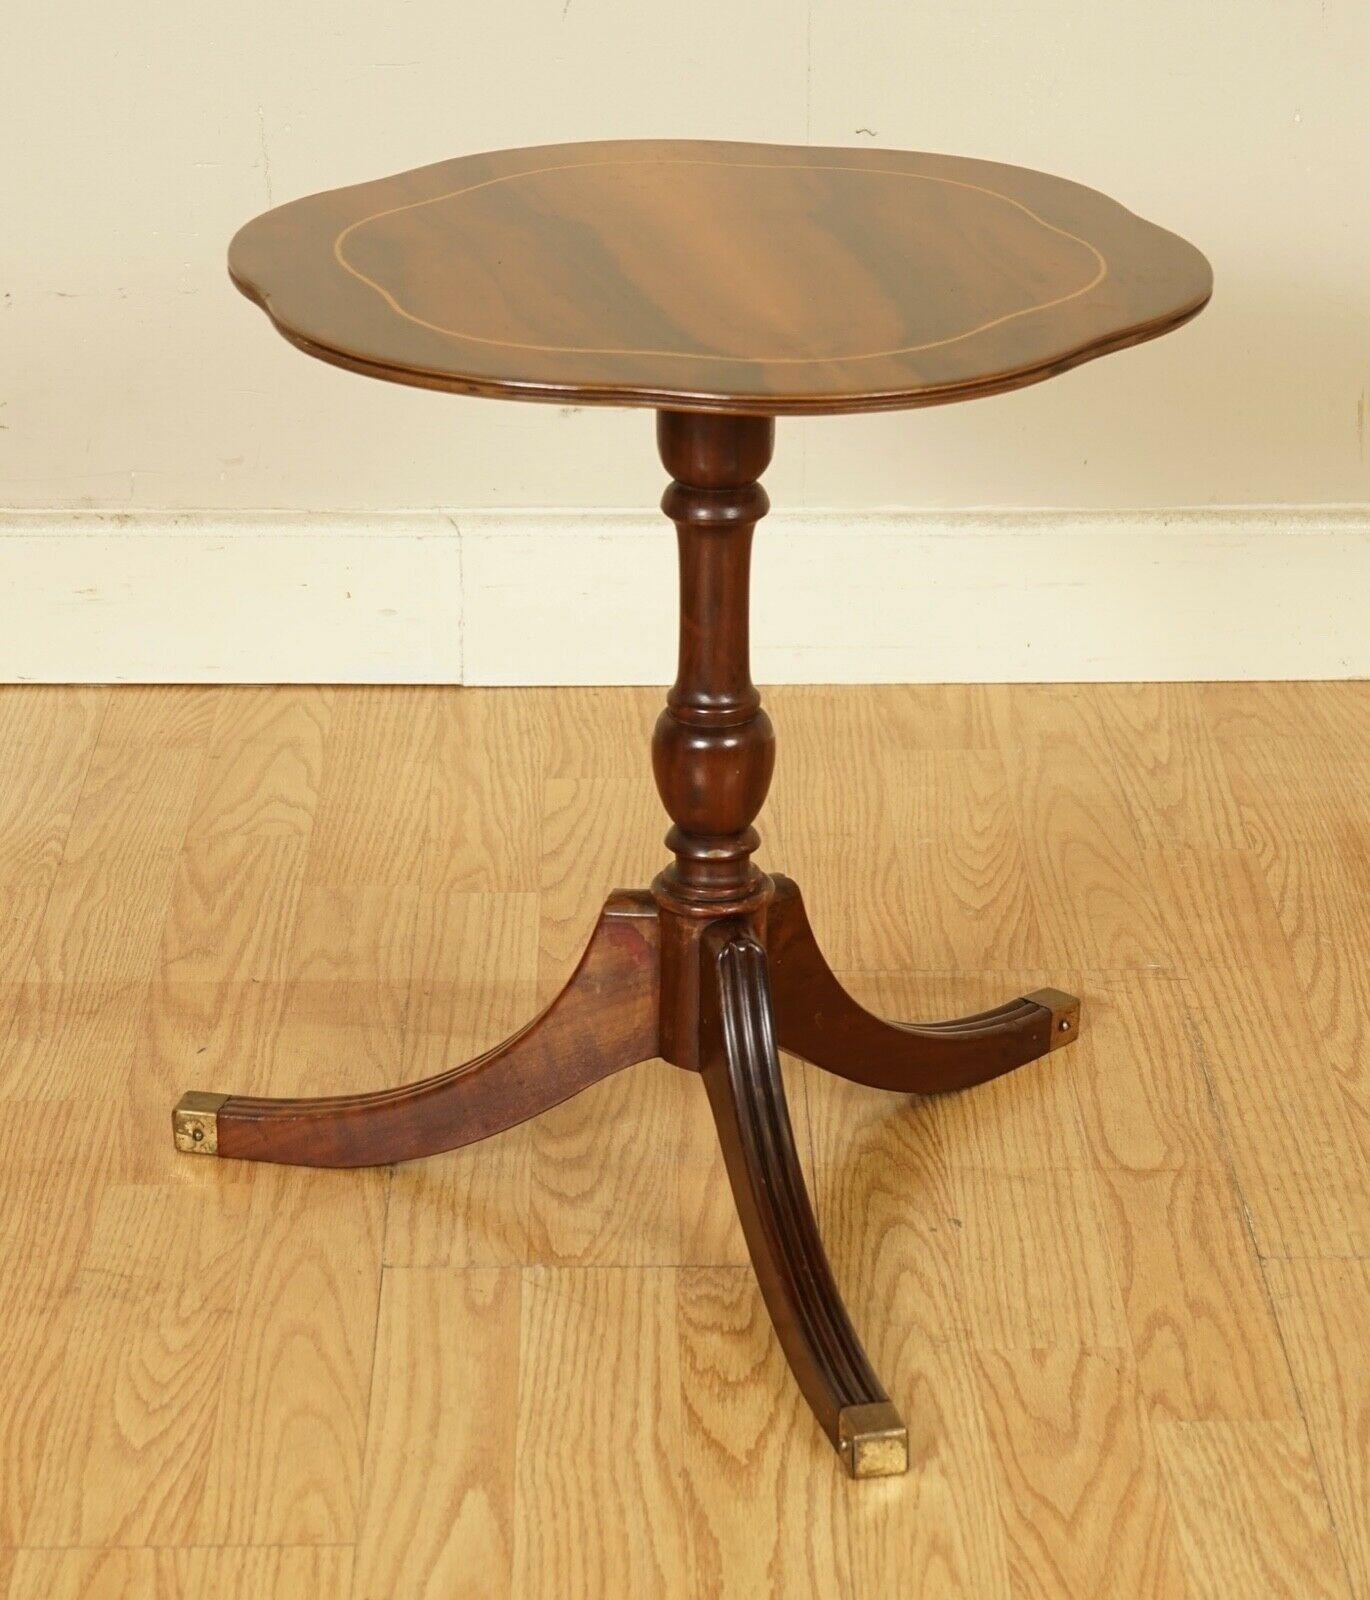 We are delighted to offer for sale this stunning vintage flamed mahogany pair of side tables.
A very solid and good quality pair can be put anywhere in the home it works perfectly as wine tables, plant stands, for your coffee etc.
We have lightly